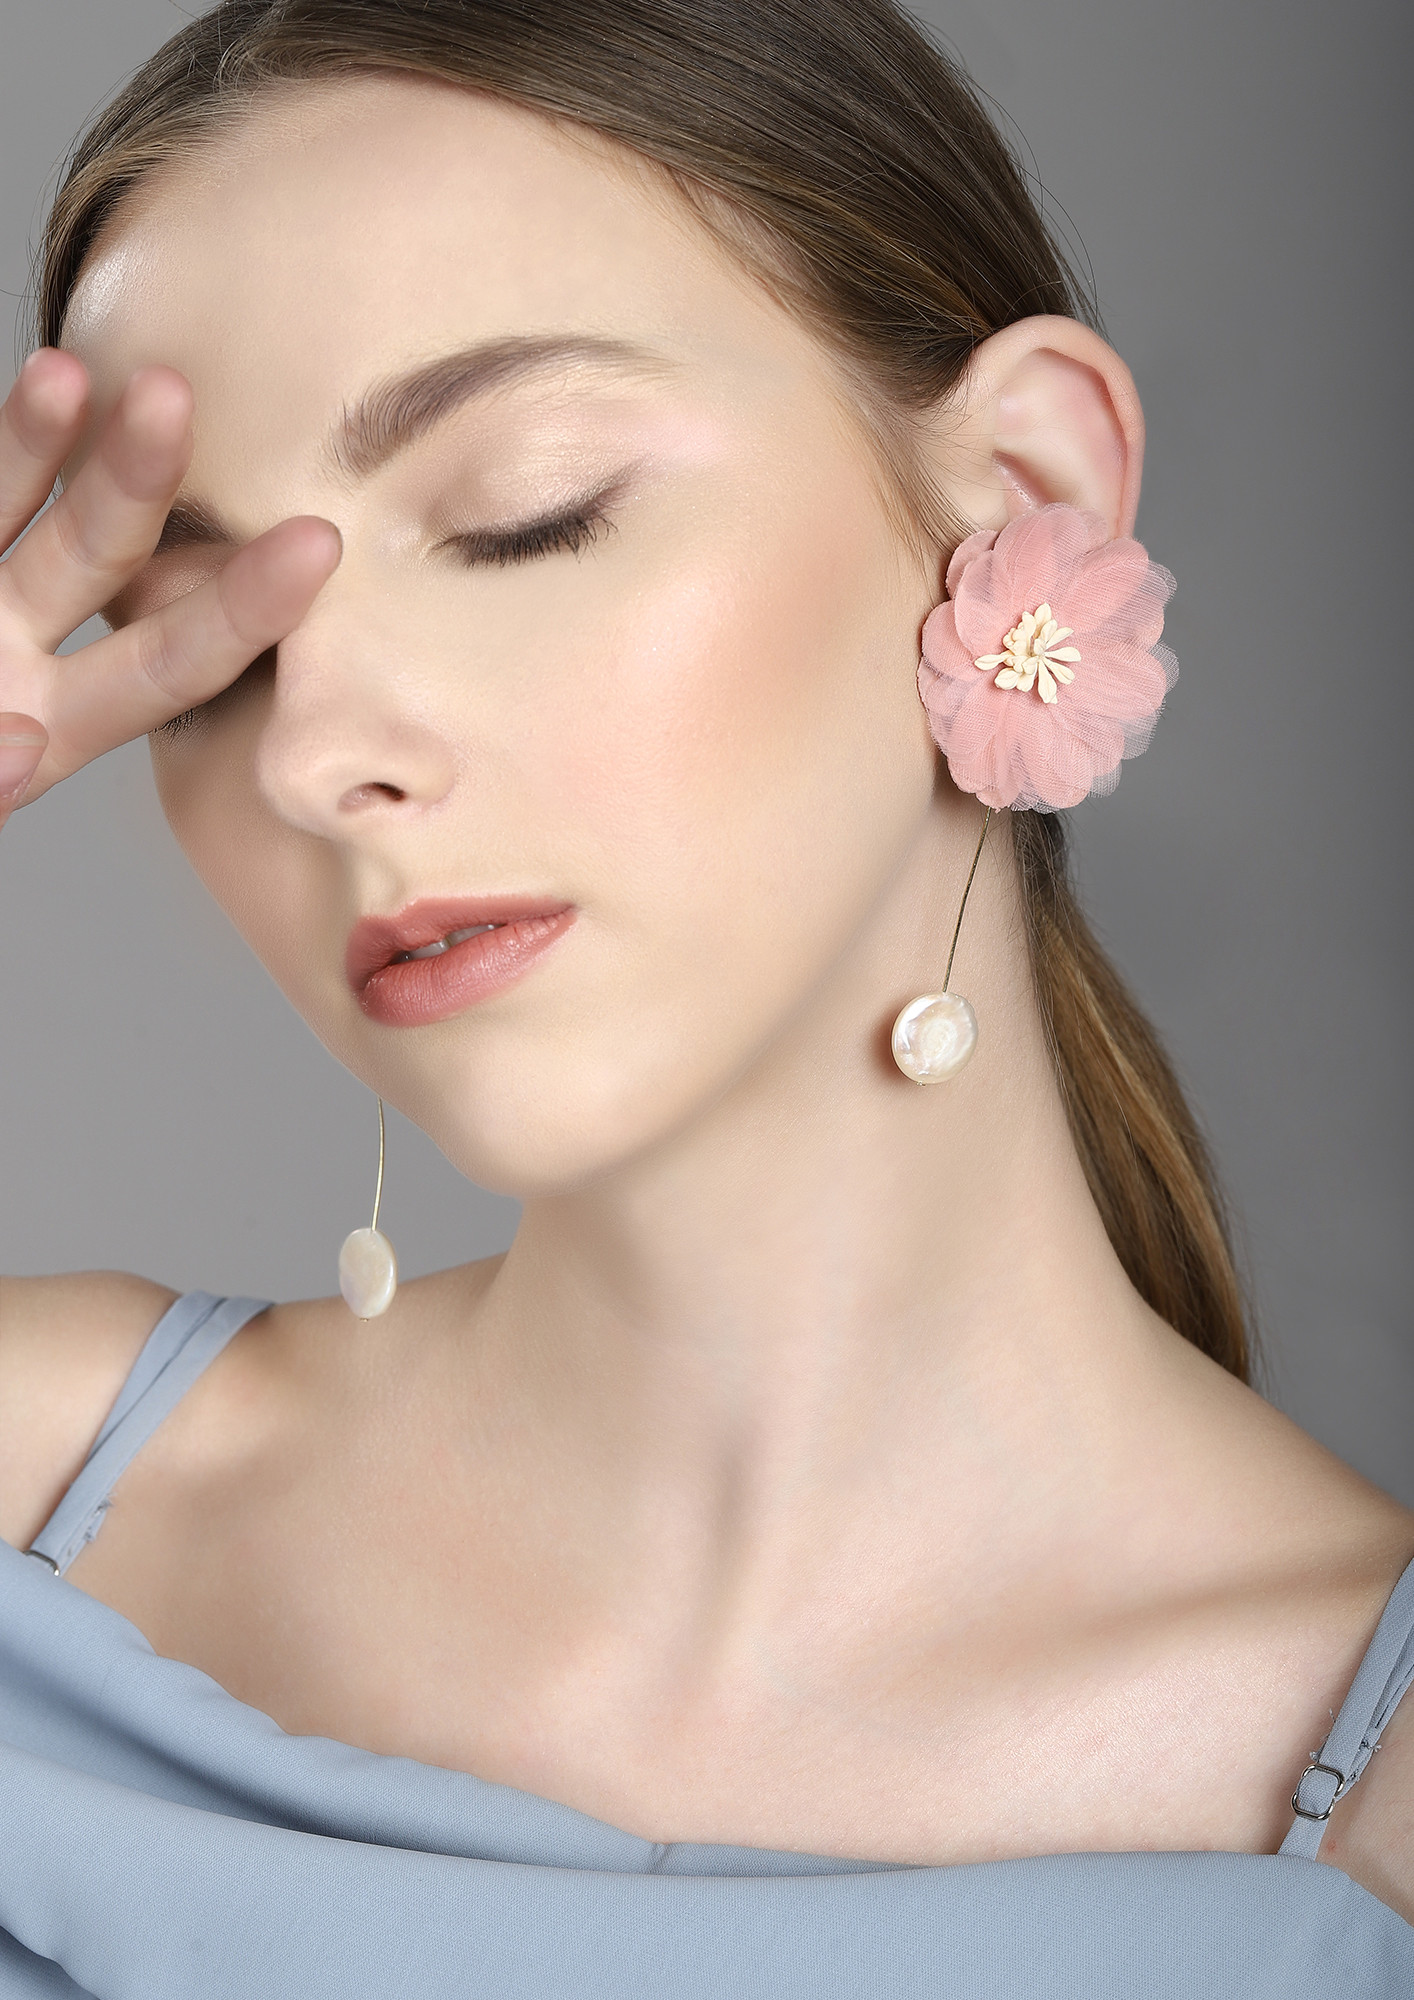 GOSS BABE FLORAL OBESSION PINK EARRINGS